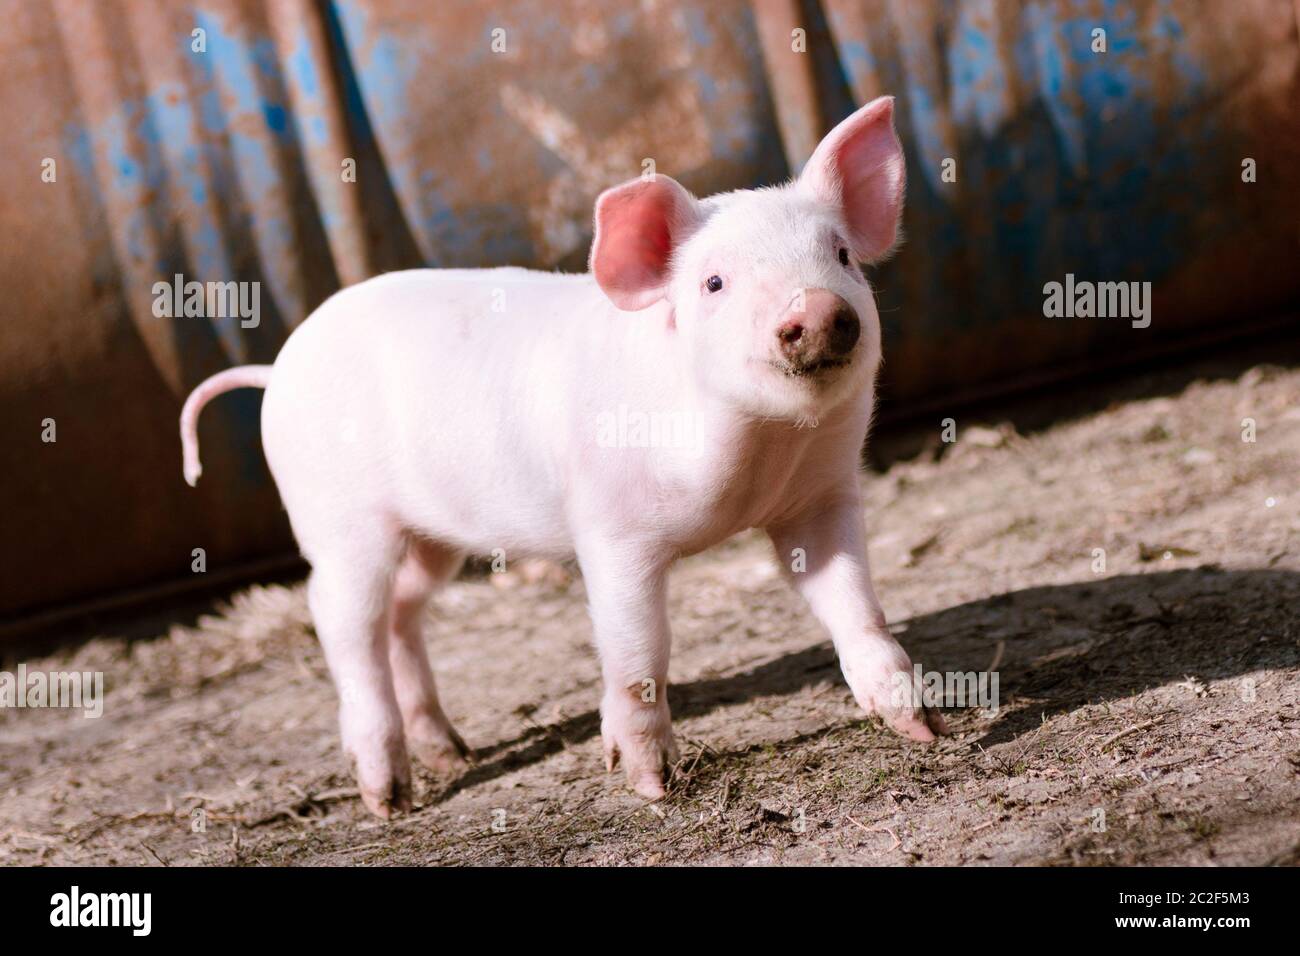 Cute little domestic pig is standing, farming and pig breeding concept. Stock Photo